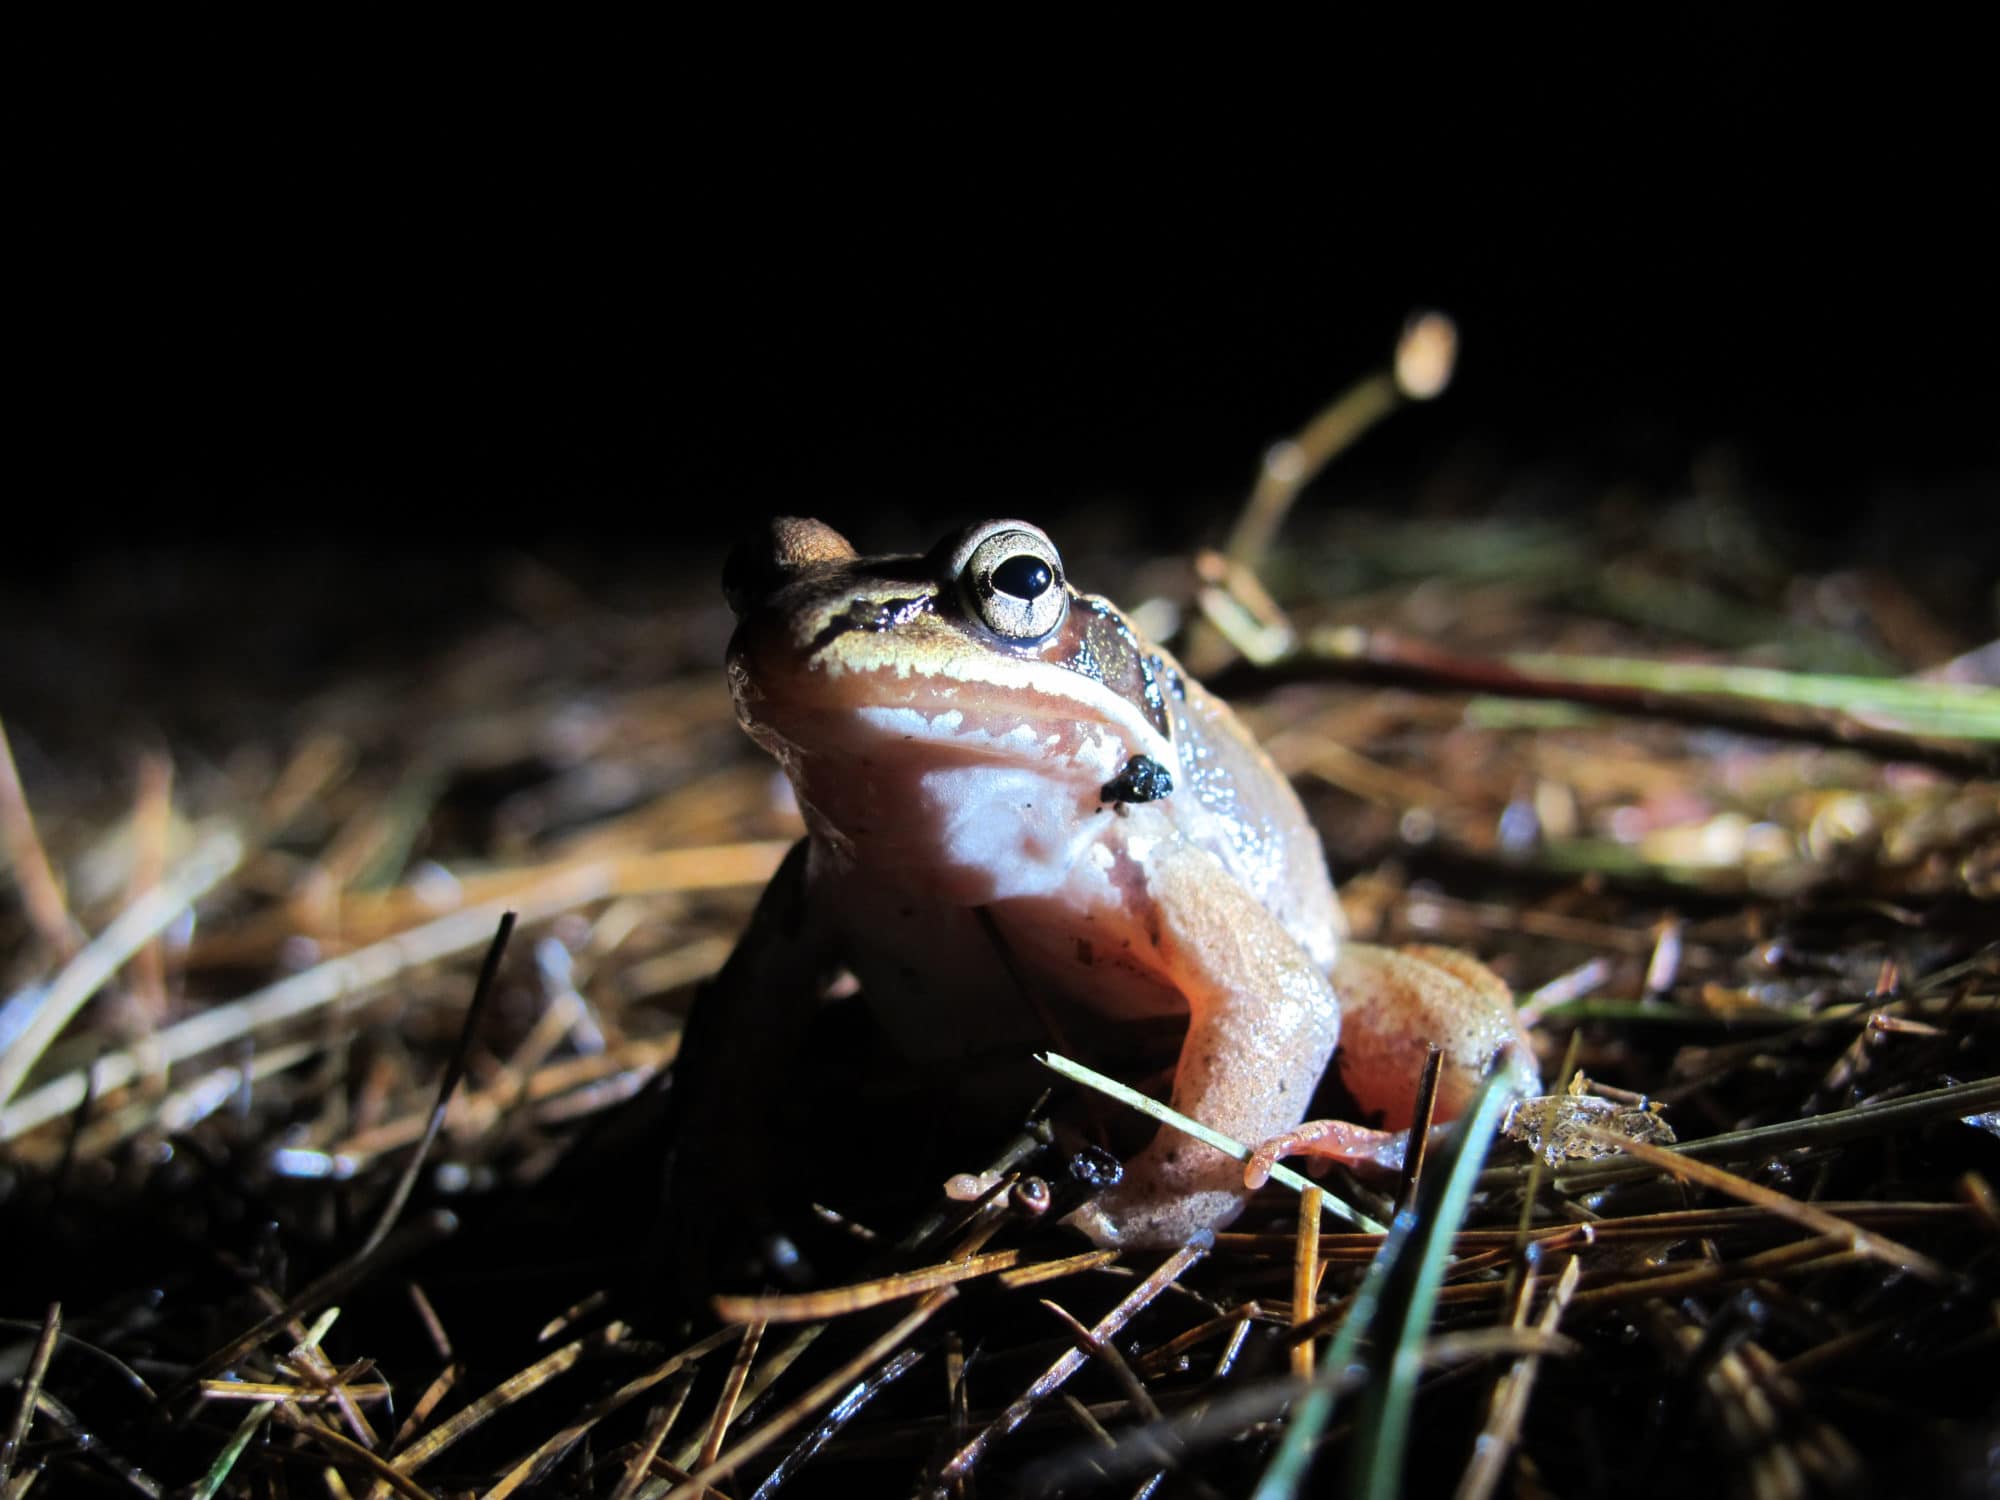 A wood frog pauses among pine needles. (photo © Brett Amy Thelen)